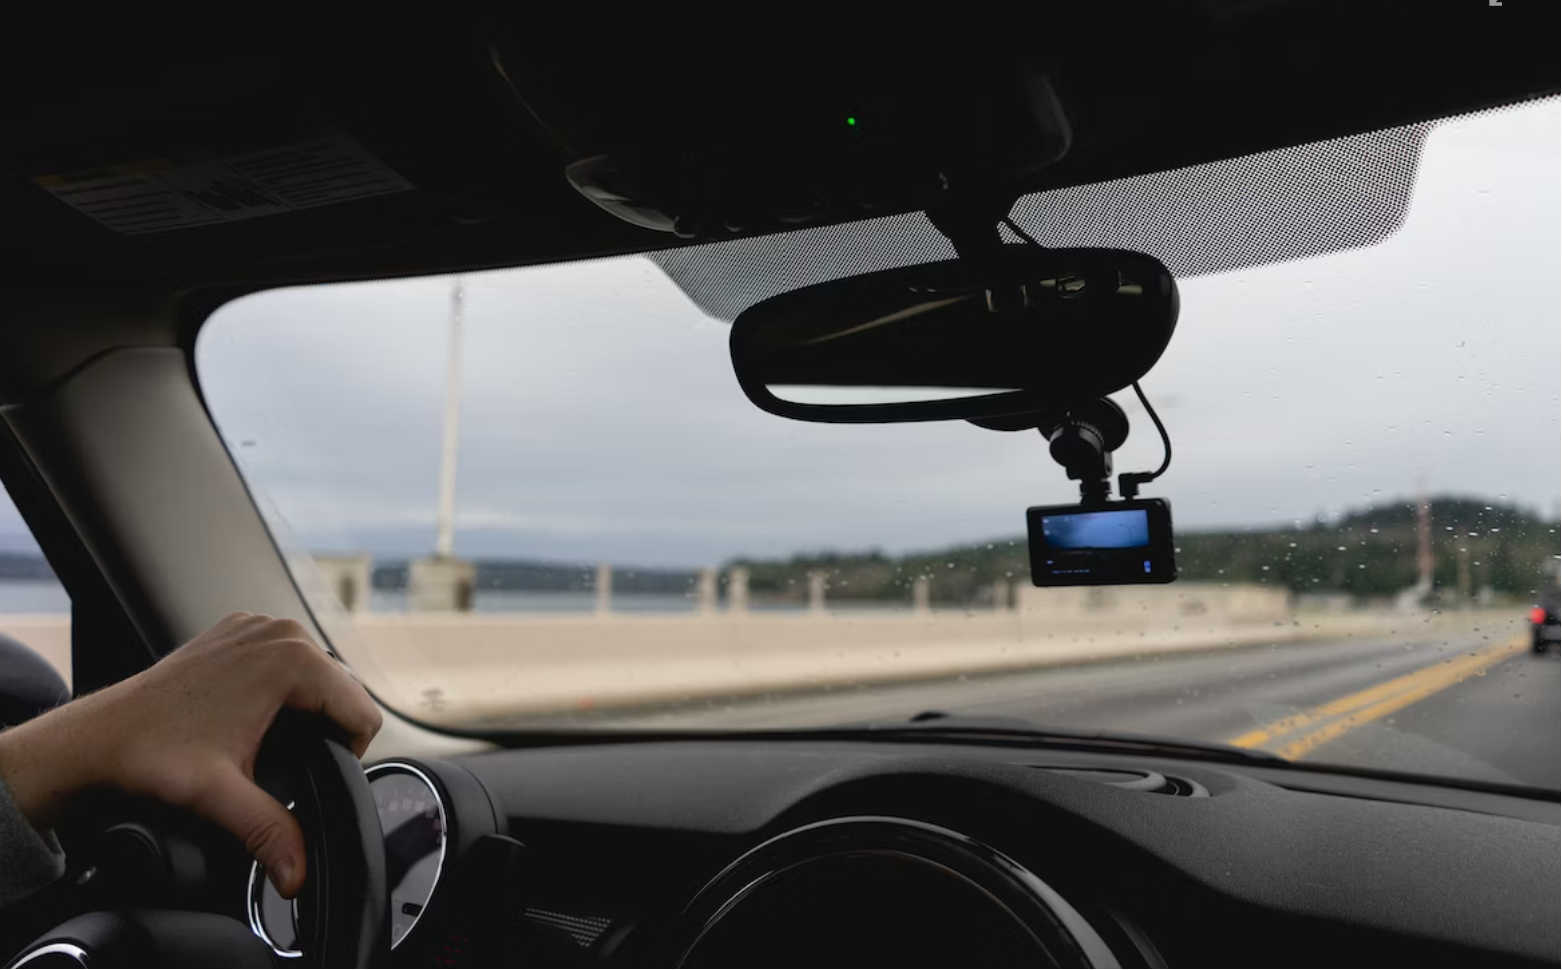 Dash Cams – Set It and Forget It – Not so much